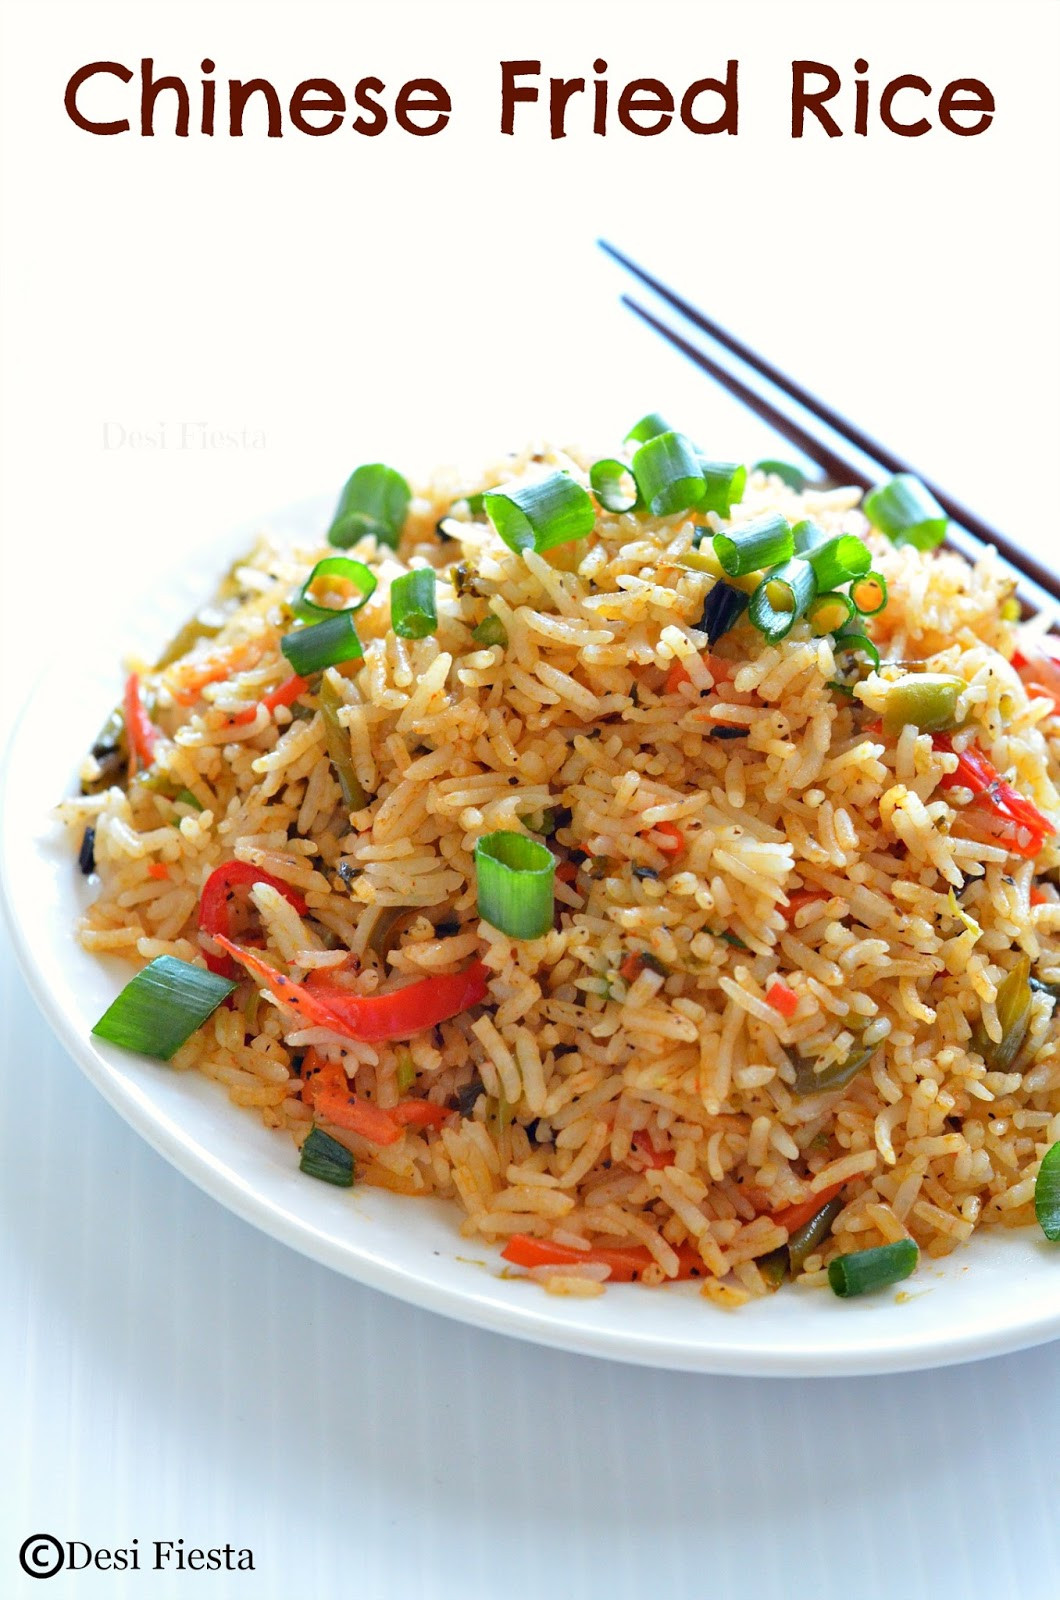 Chinese Fried Rice Recipes
 Desi Fiesta Chinese Fried Rice